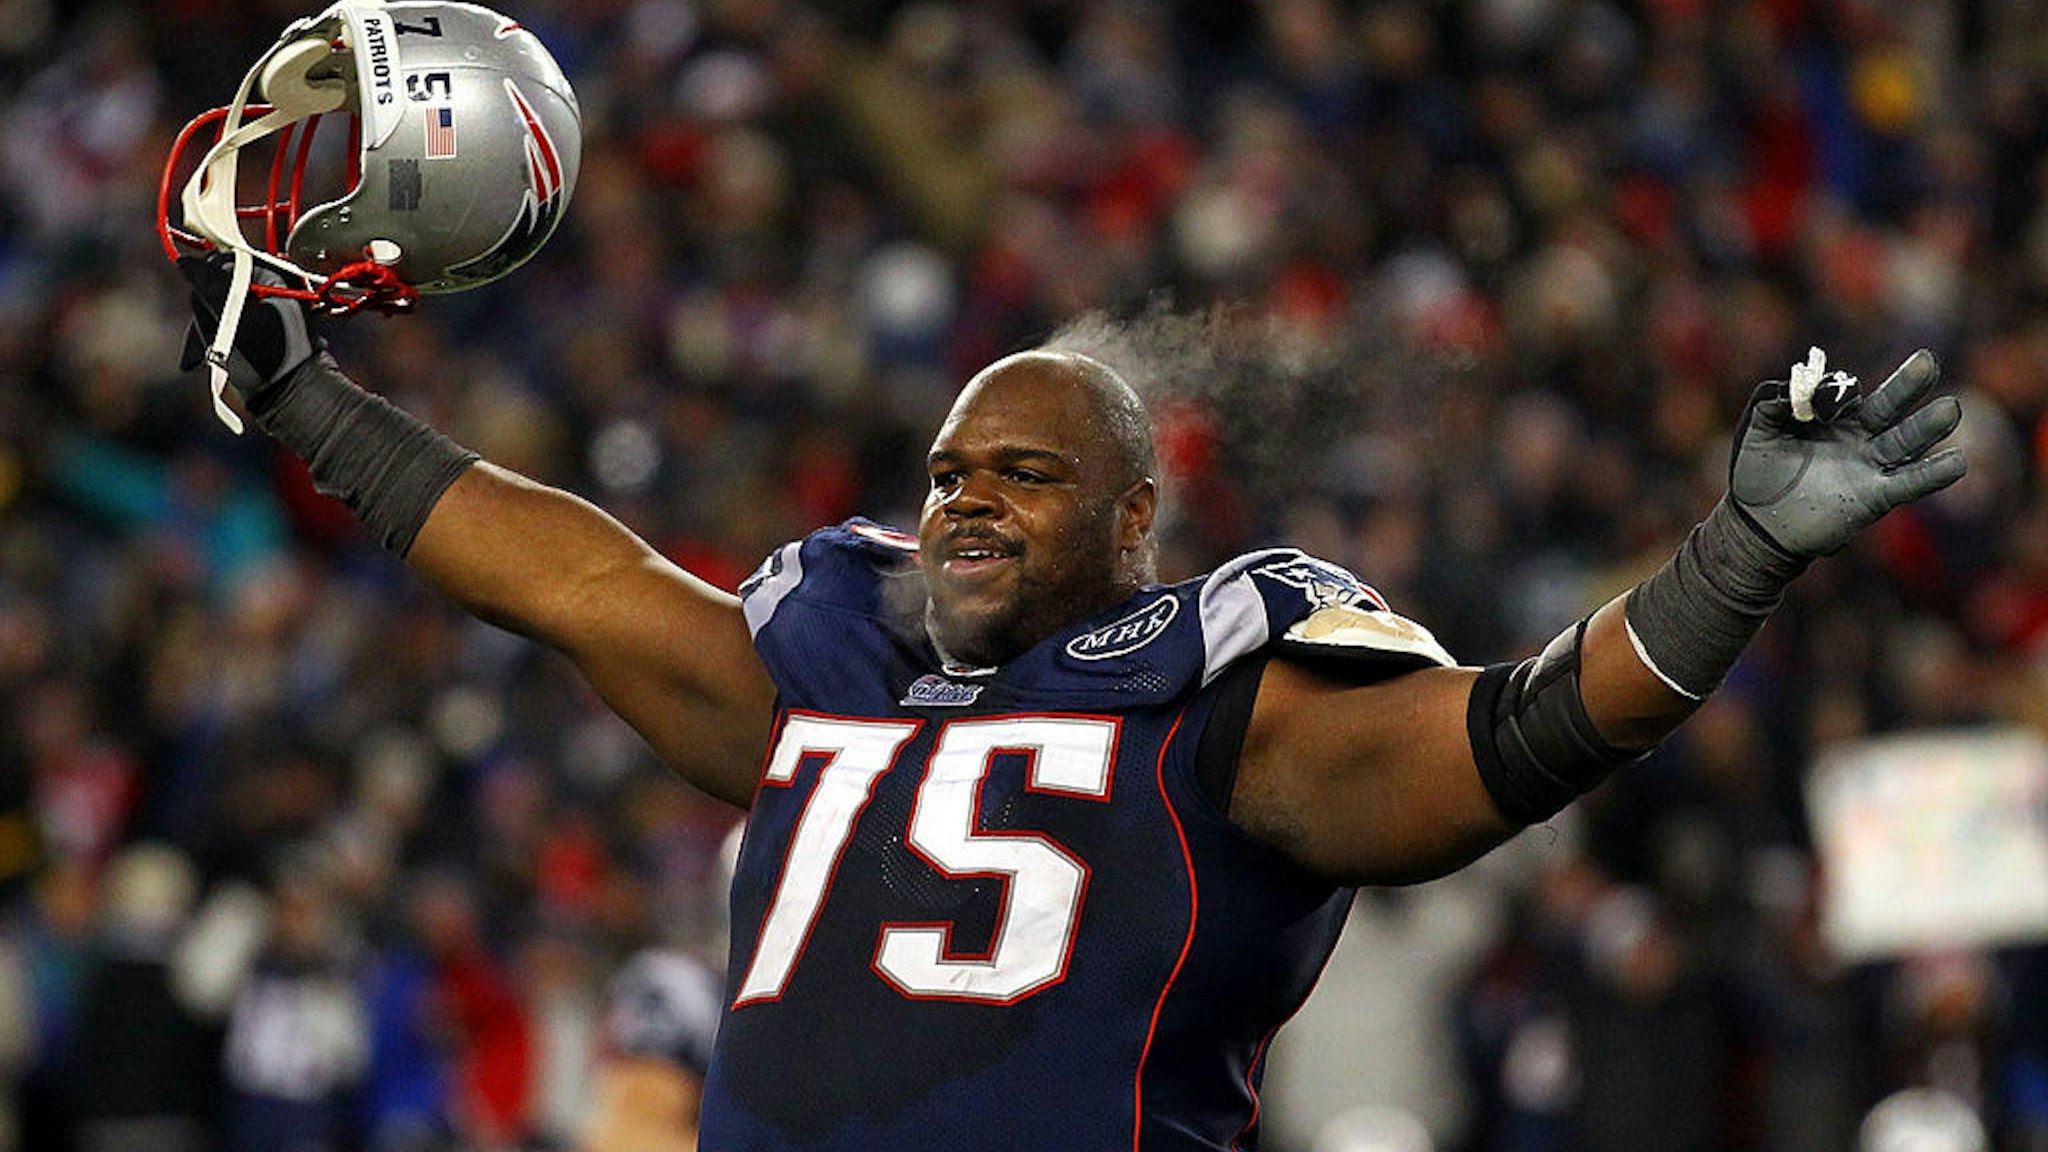 FOXBORO, MA - JANUARY 22: Vince Wilfork #75 of the New England Patriots celebrates after defeating the Baltimore Ravens in the AFC Championship Game at Gillette Stadium on January 22, 2012 in Foxboro, Massachusetts. The New England Patriots defeated the Baltimore Ravens 20-23. (Photo by Al Bello/Getty Images)